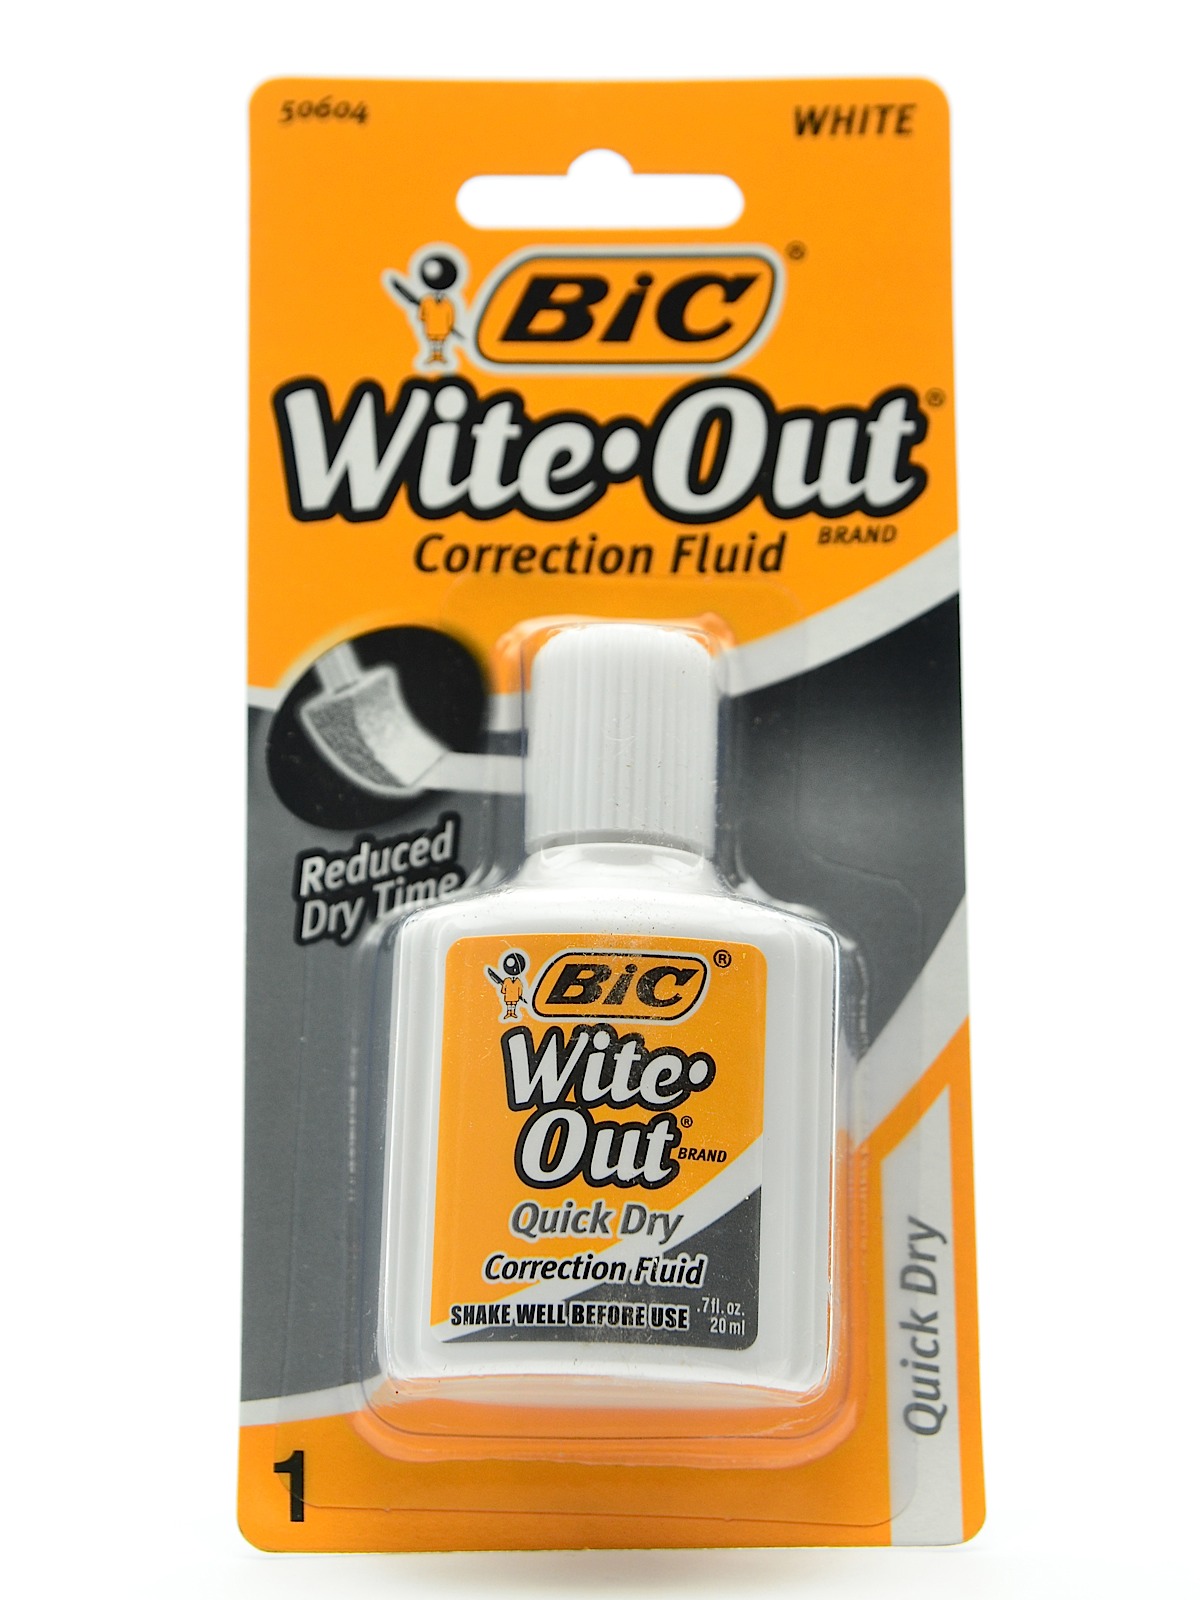 white out with brush applicator